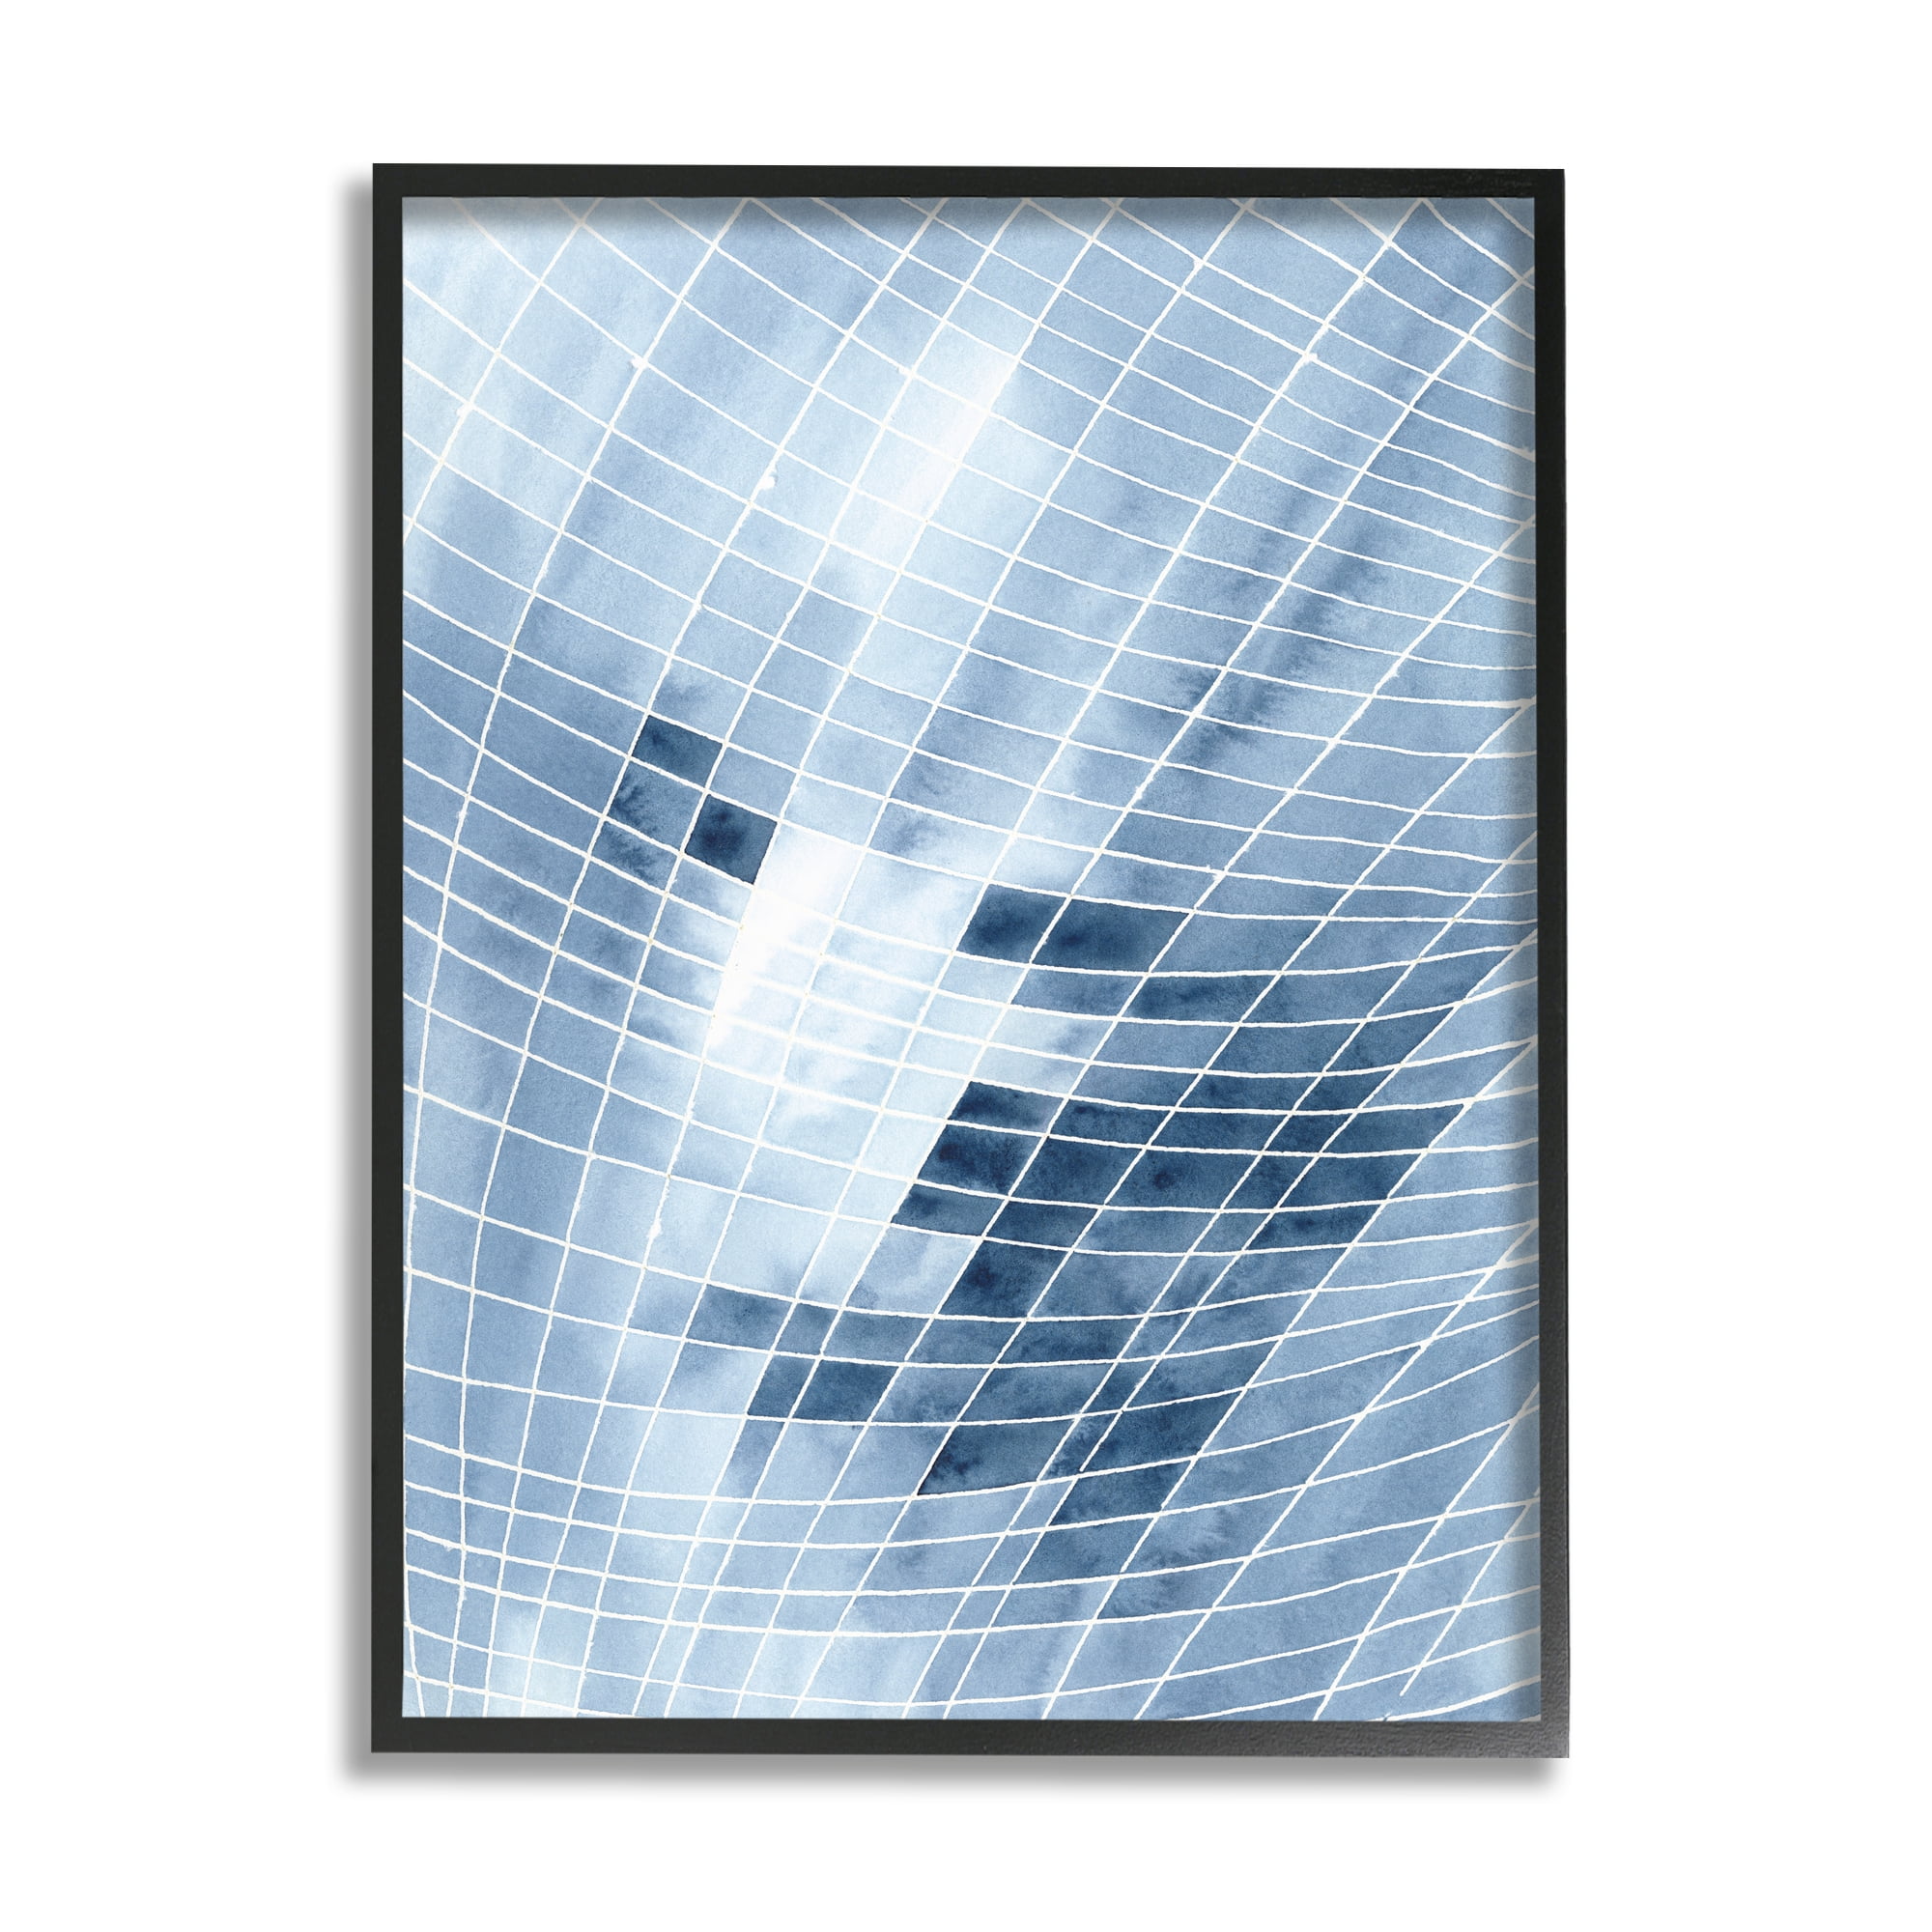 Contemporary Square Pattern Gallery-Wrapped Canvas Wall Art, 16x20